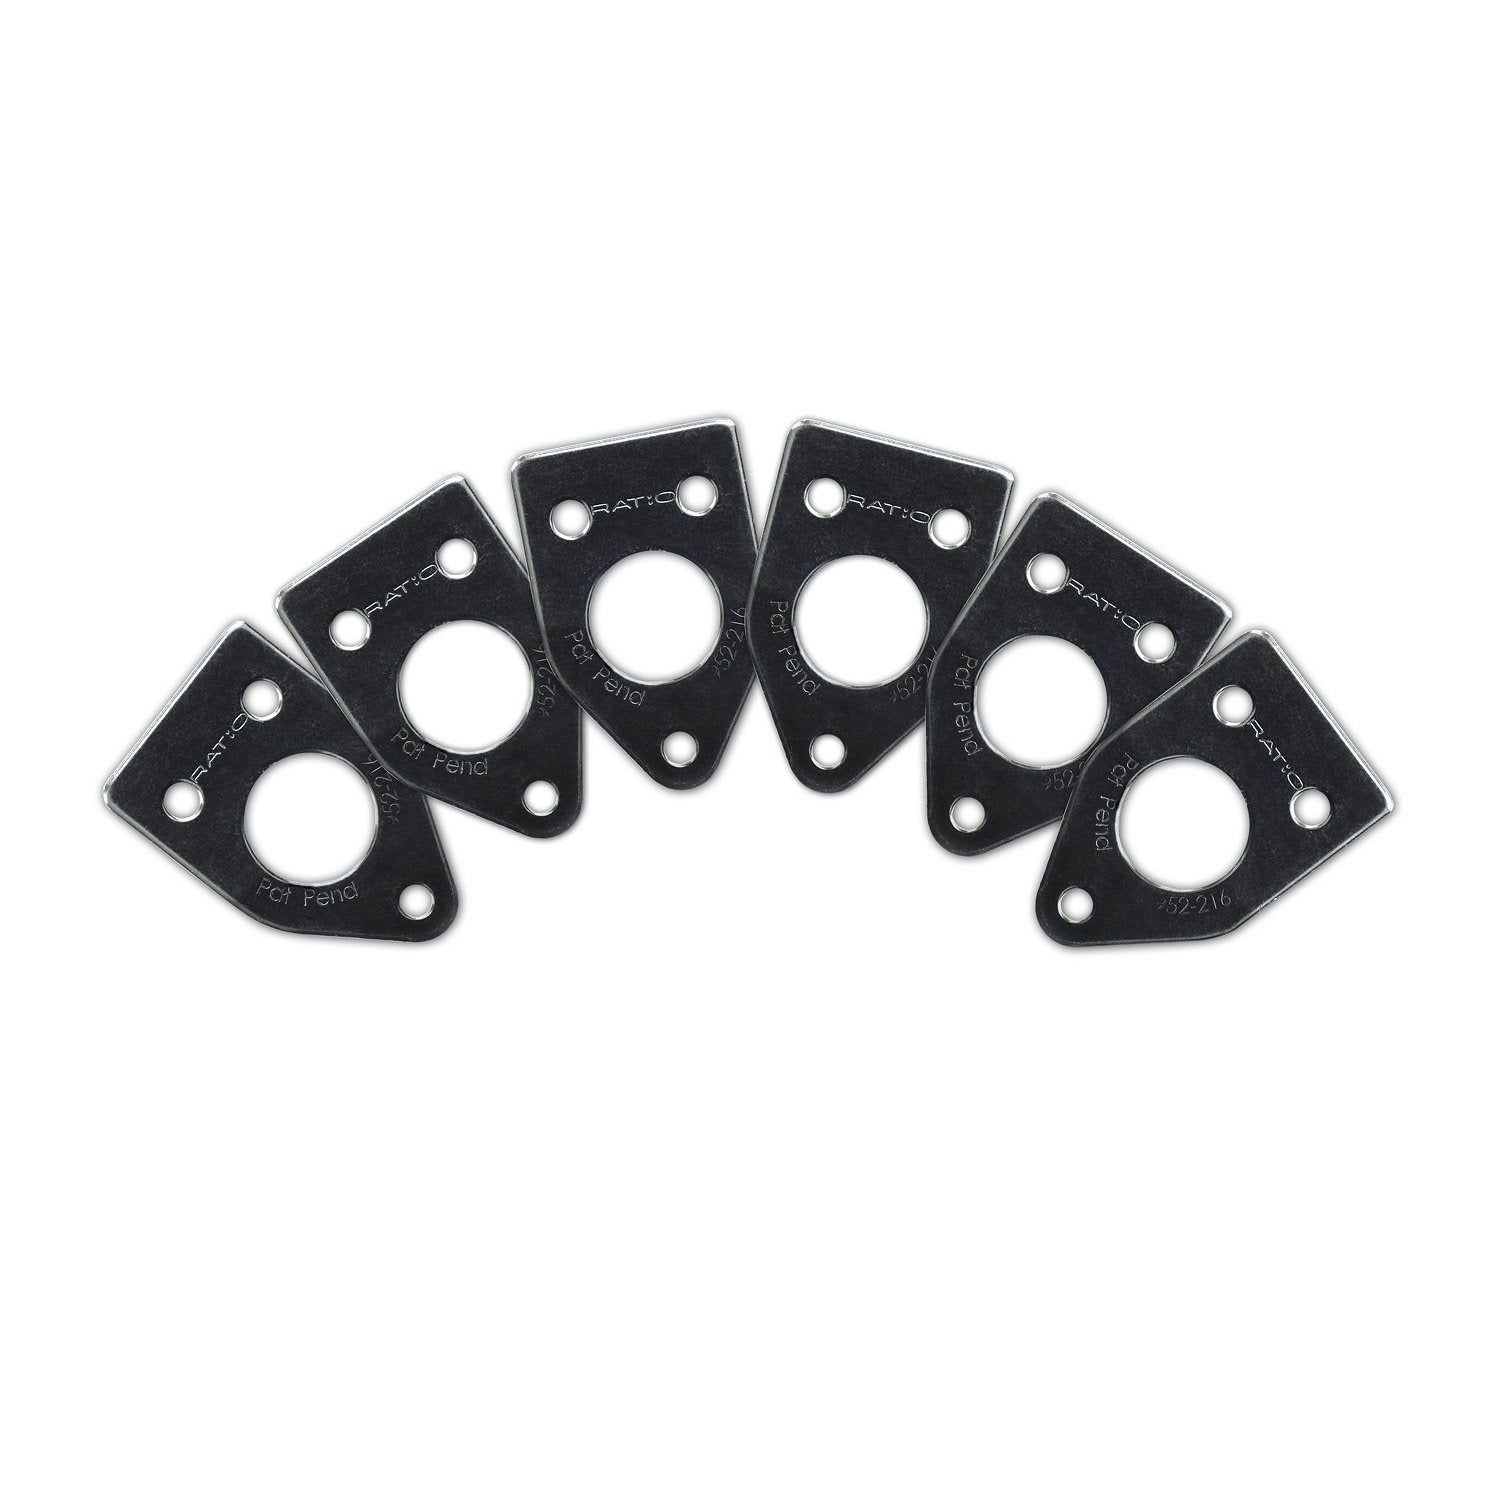 InvisoMatch Plates for Ratio Tuners, 90 Degree Screw Hole (set of 6) (Select Finish) - Graph Tech Guitar Labs Ltd.